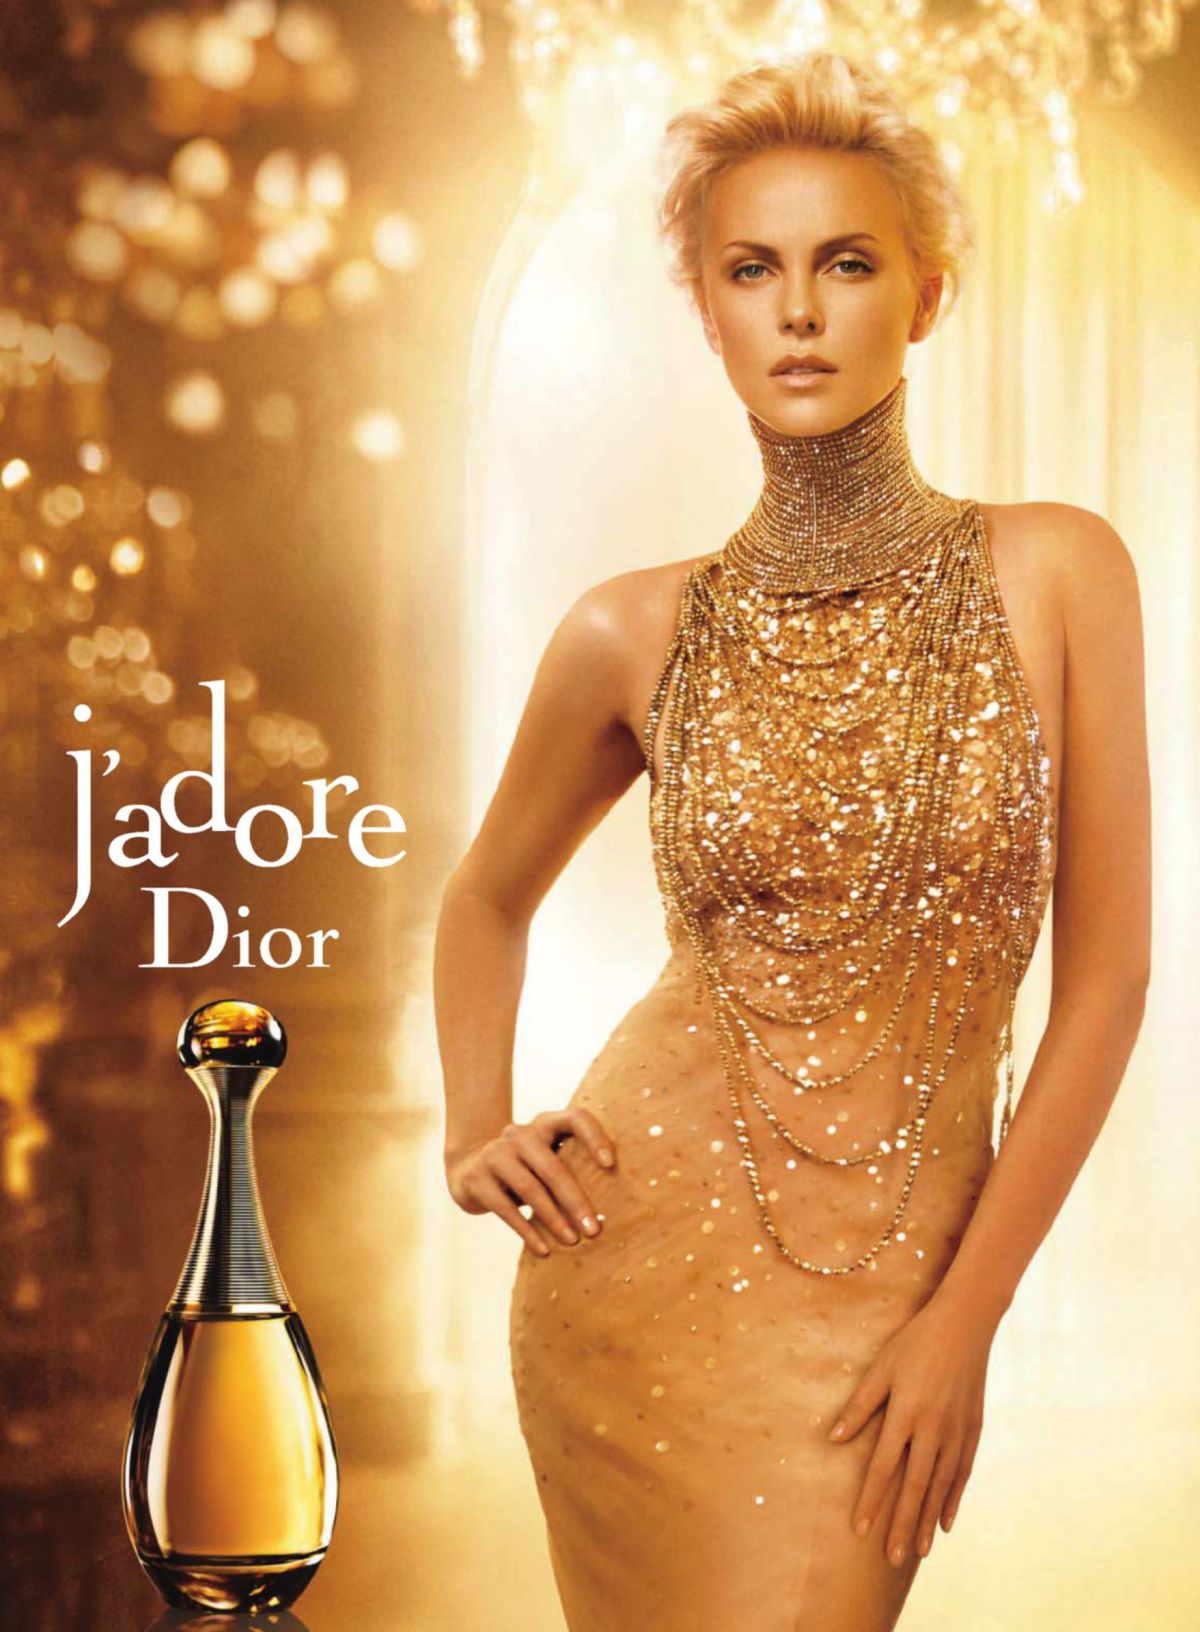 CHARLIZE THERON for Dior J’Adore - 2004 to 2018.